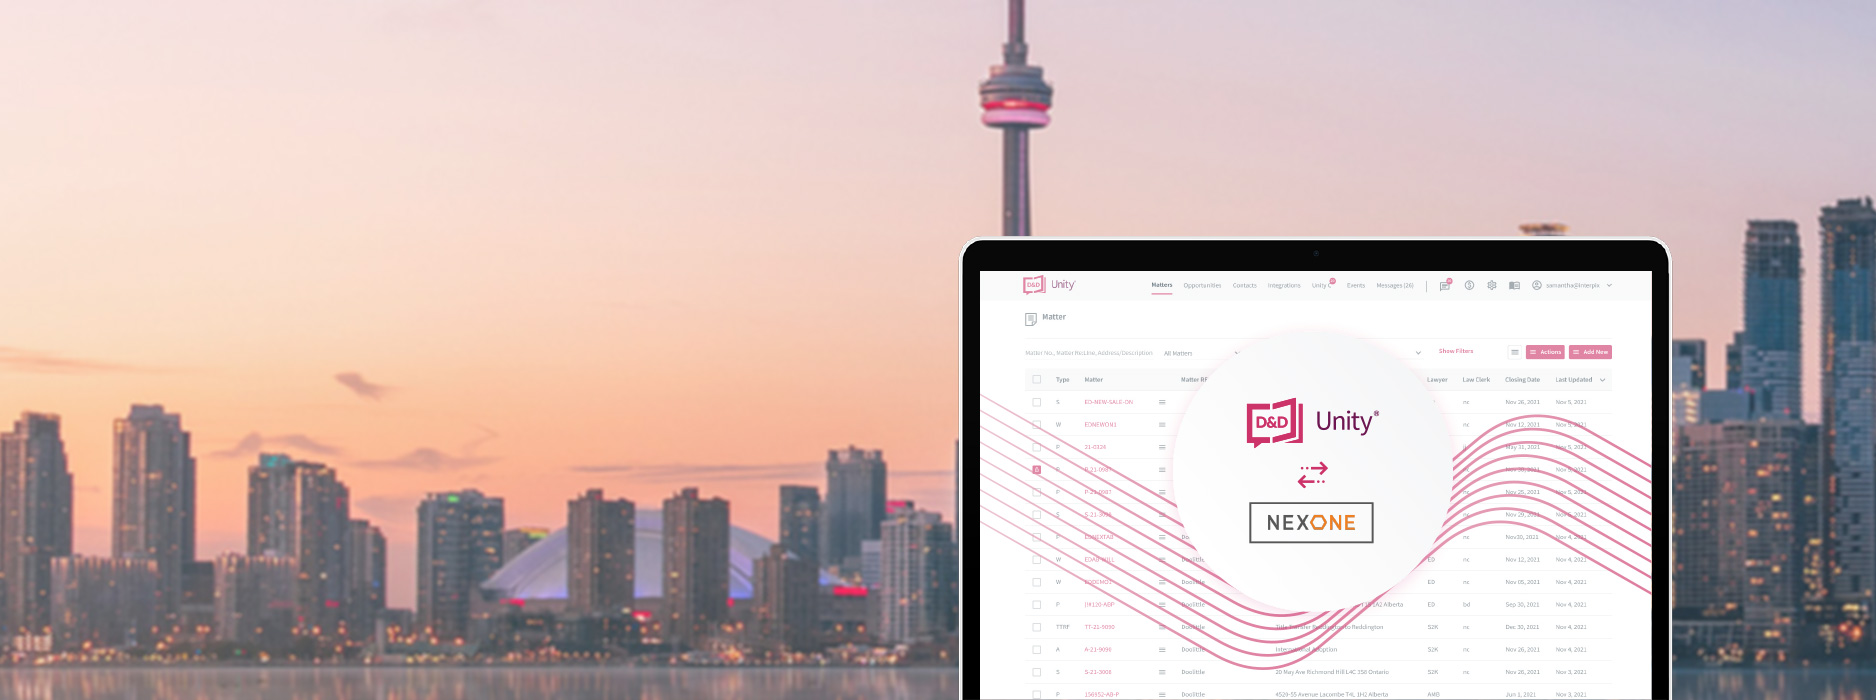 The Unity and Nexone Integration opened on a laptop, with the Toronto skyline visible in the background